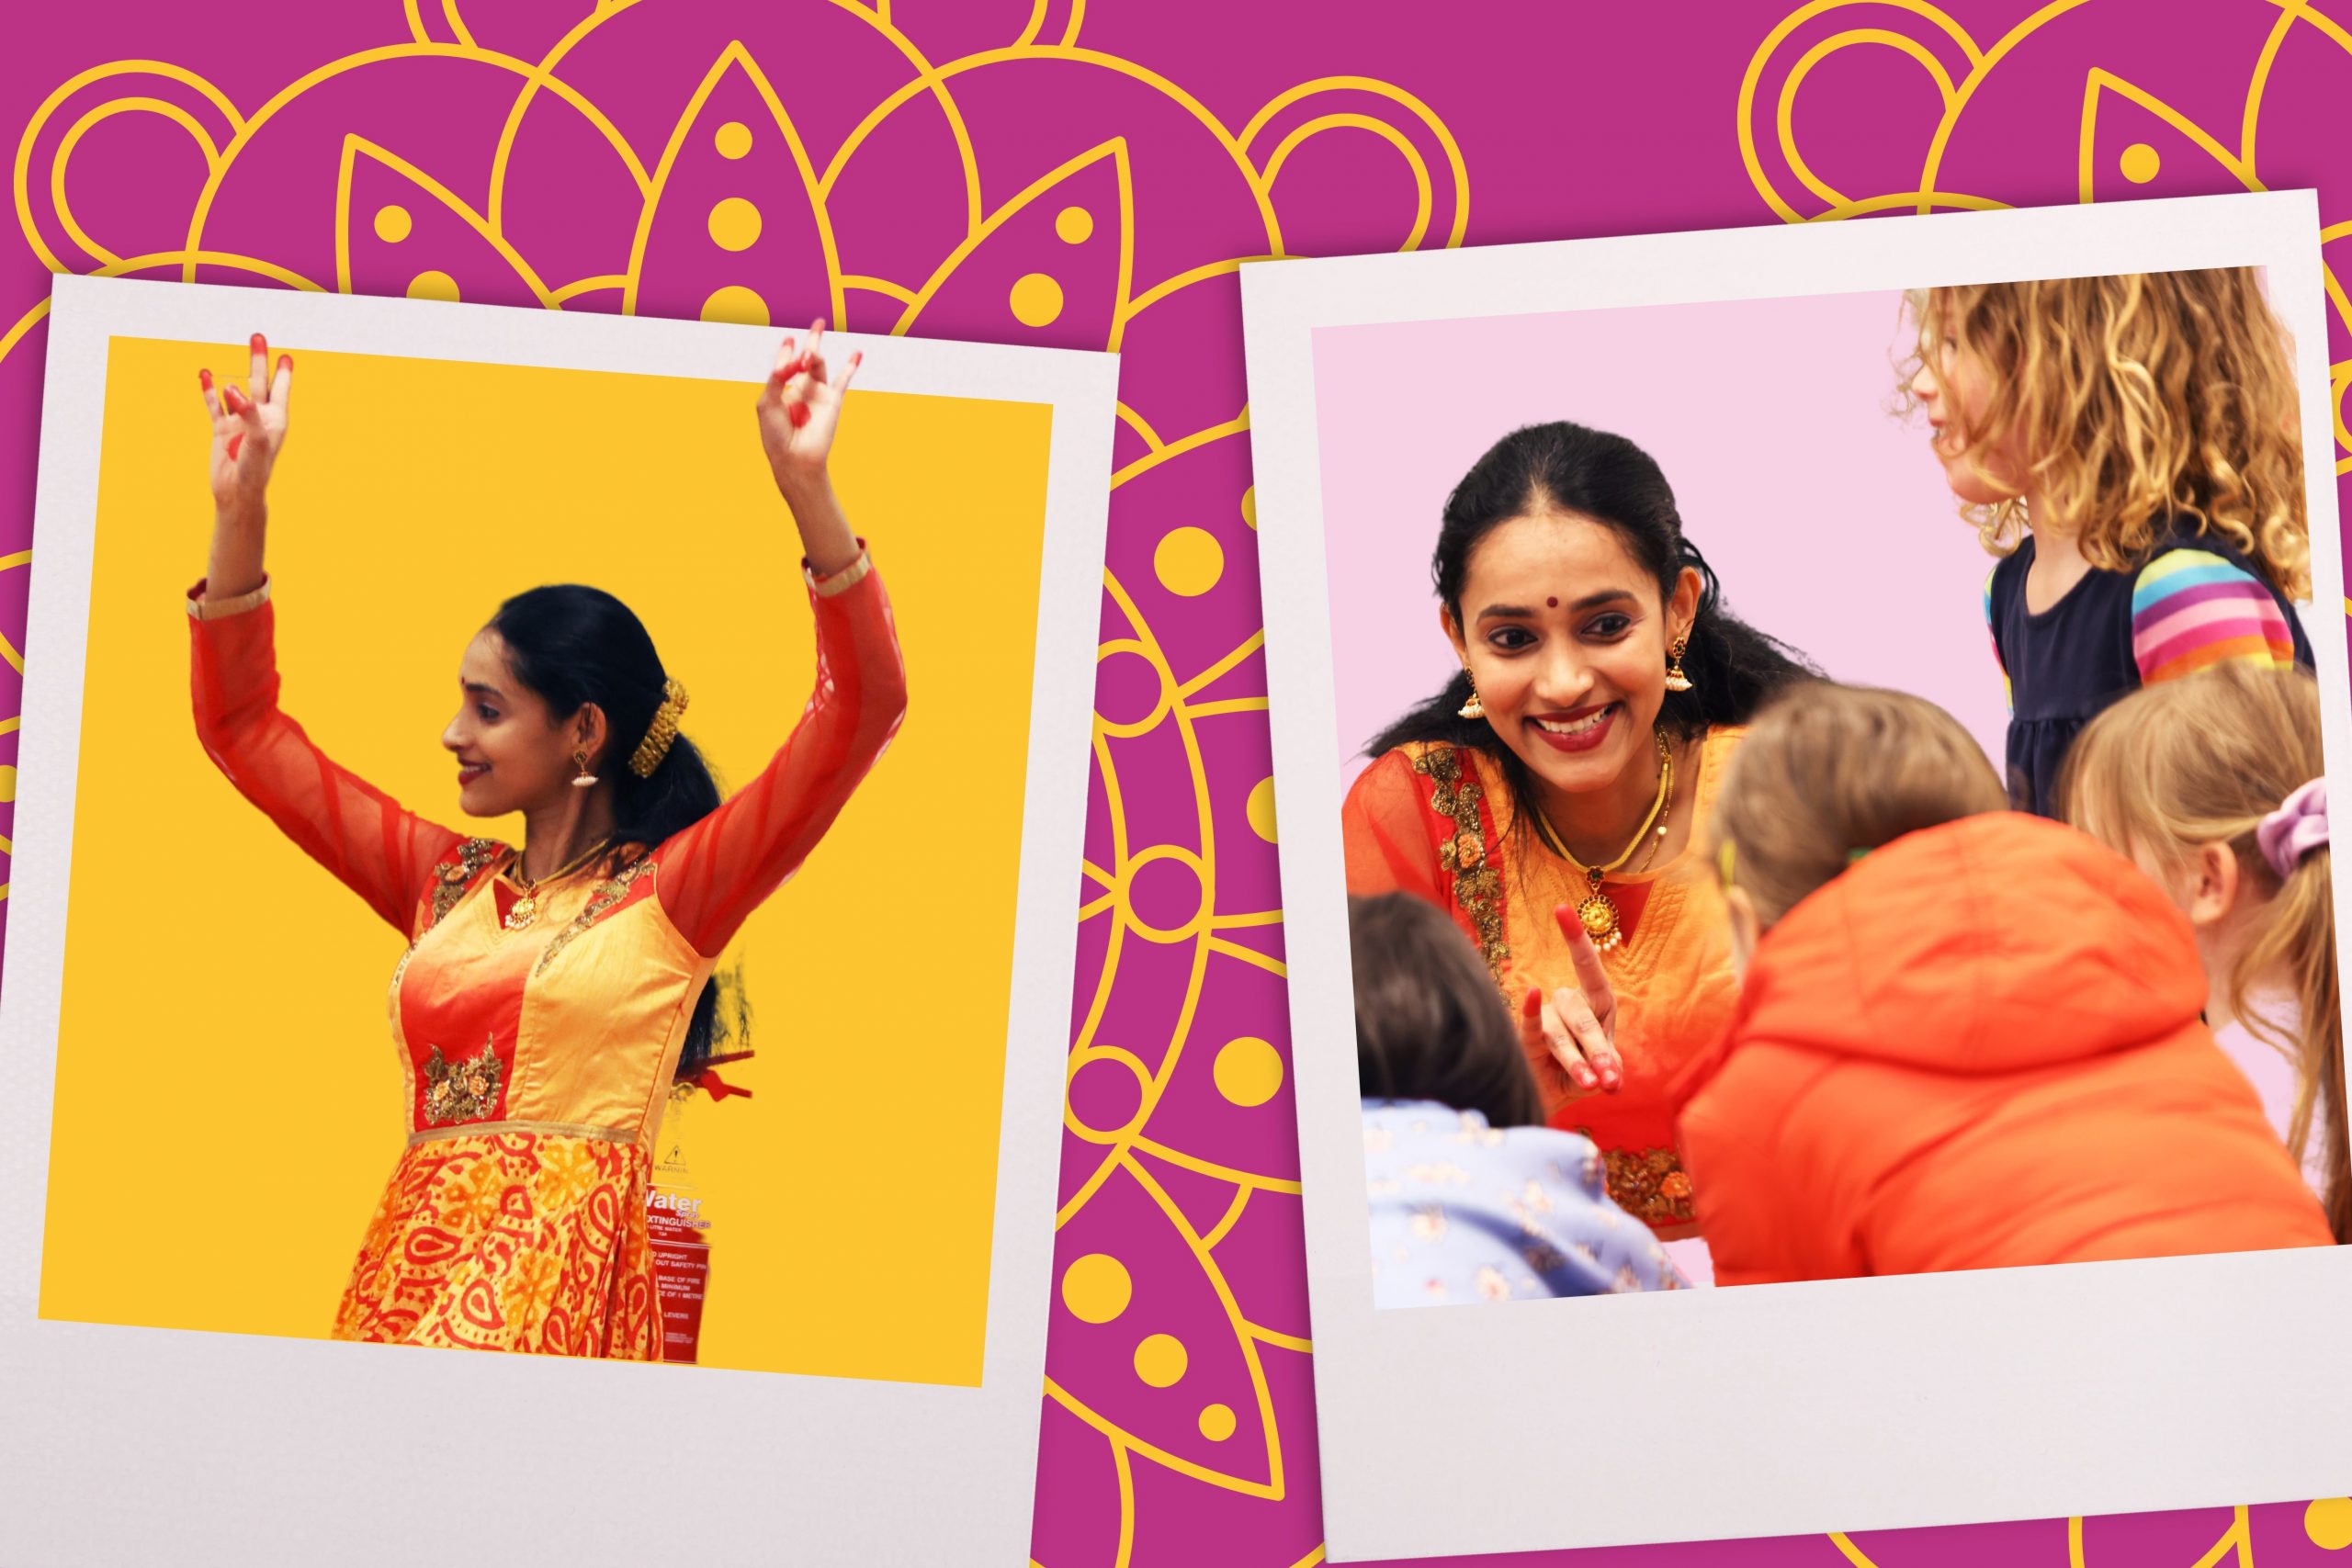 Two polaroid images of a woman in an orange lengha dress, dancing in the first image and crouched down with a group of children in the second image. The background is bright pink with yellow rangoli patterns superimposed over it.